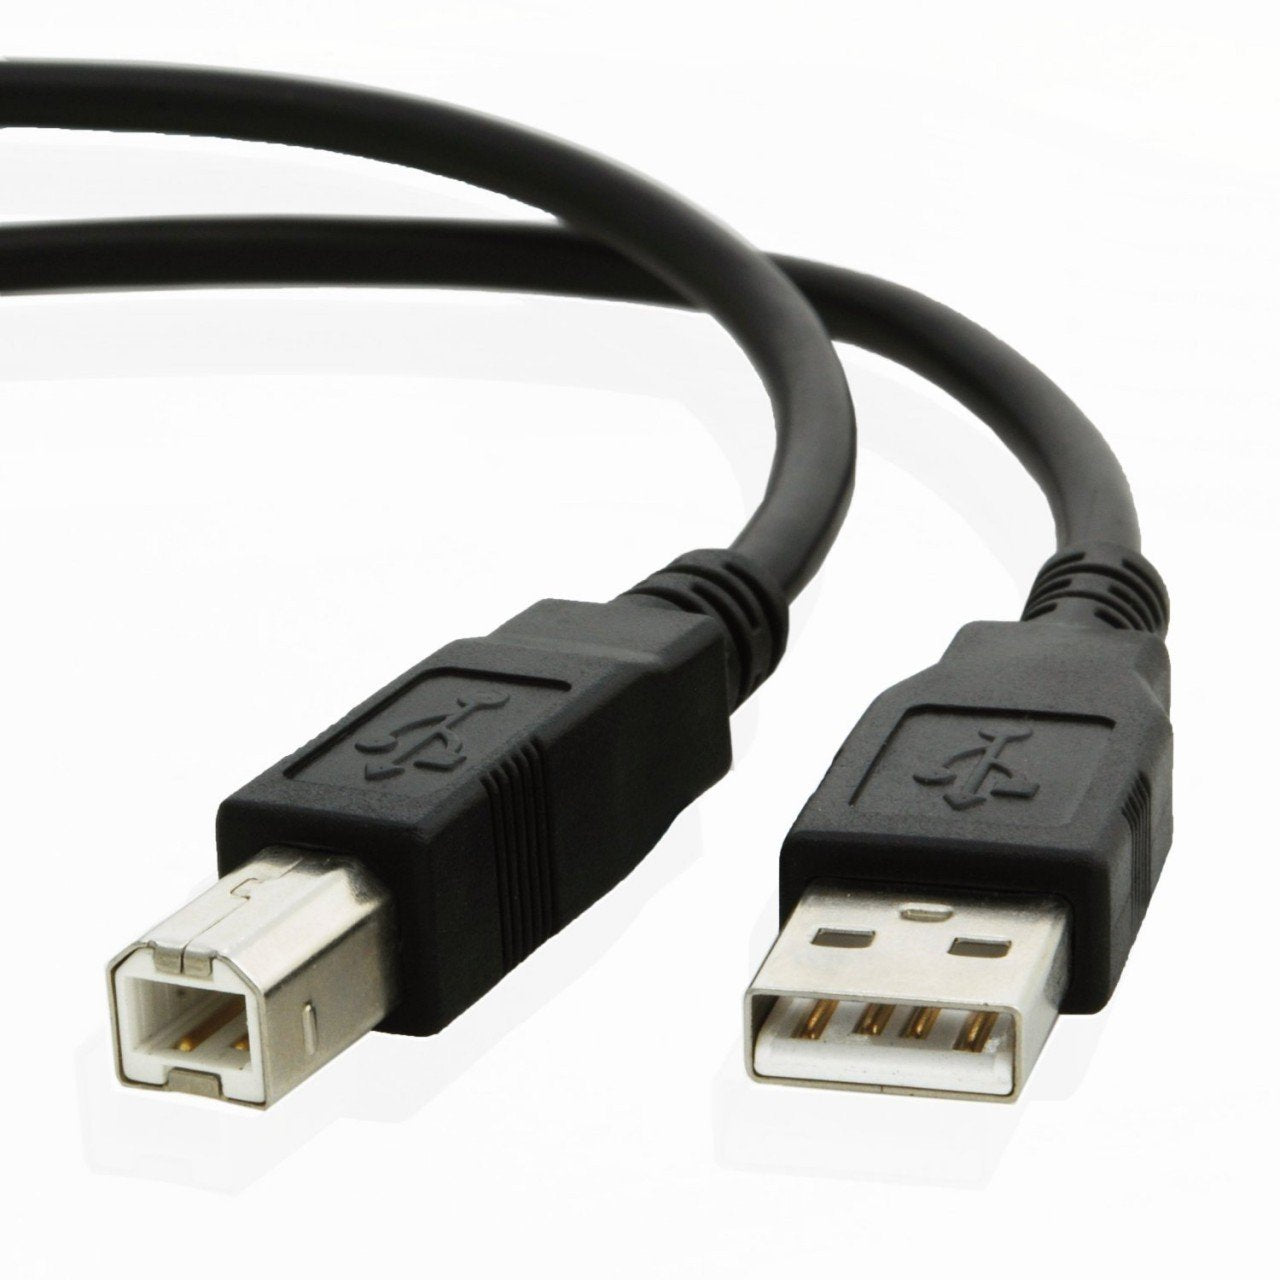 USB cable for Casio DIGITAL PIANO PX-830